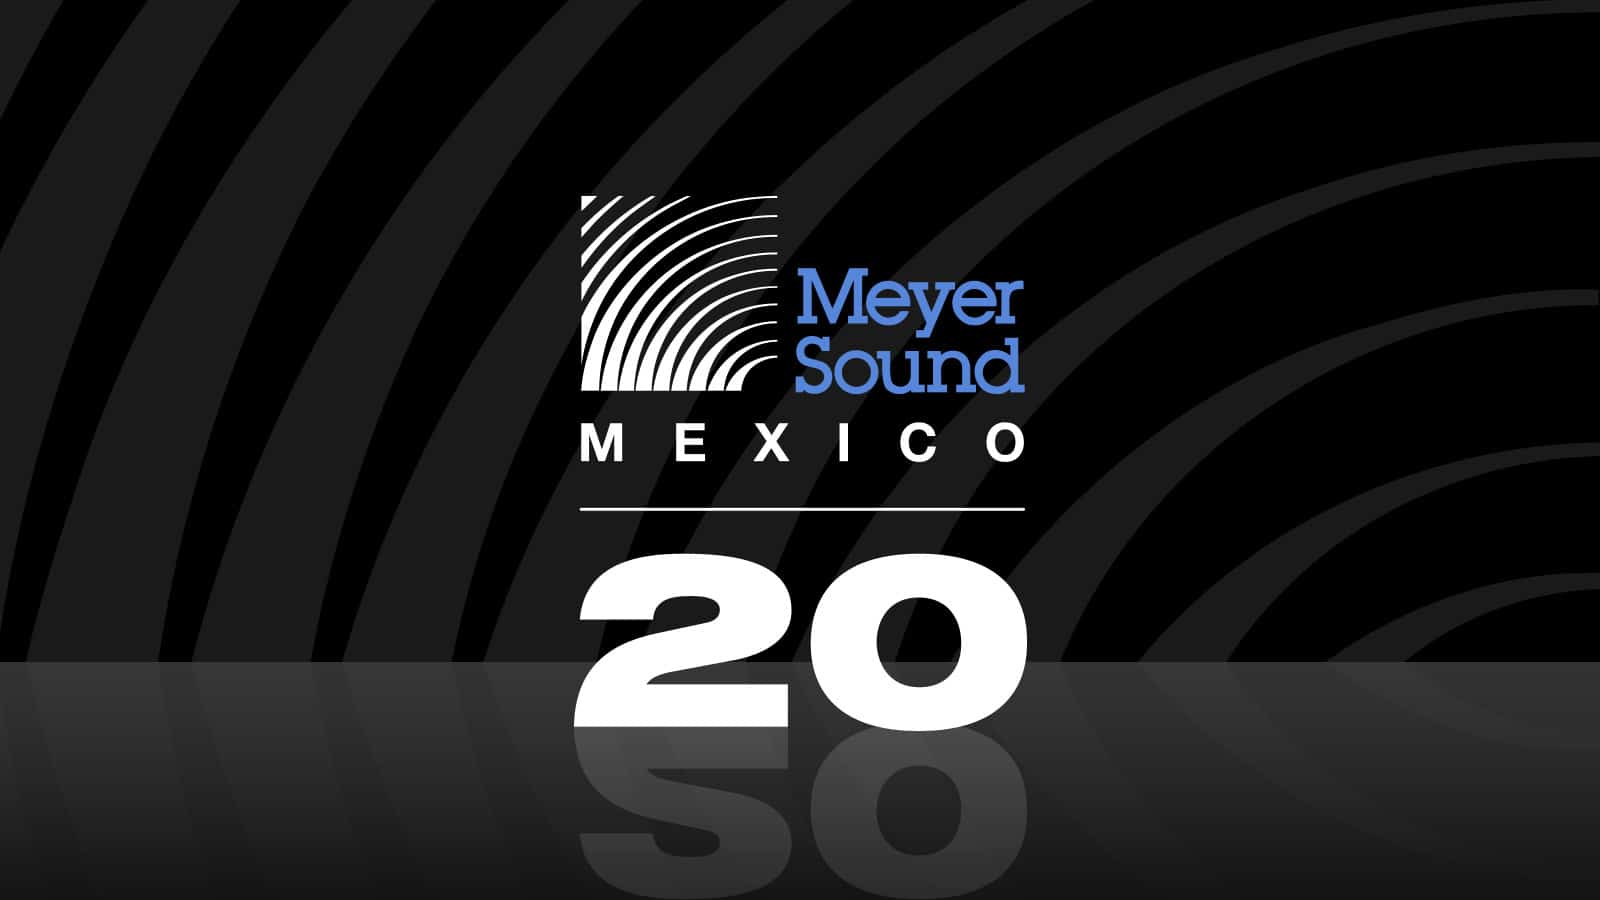 Meyer Sound Founders Celebrate Dual Anniversaries at sound:check Xpo in Mexico City